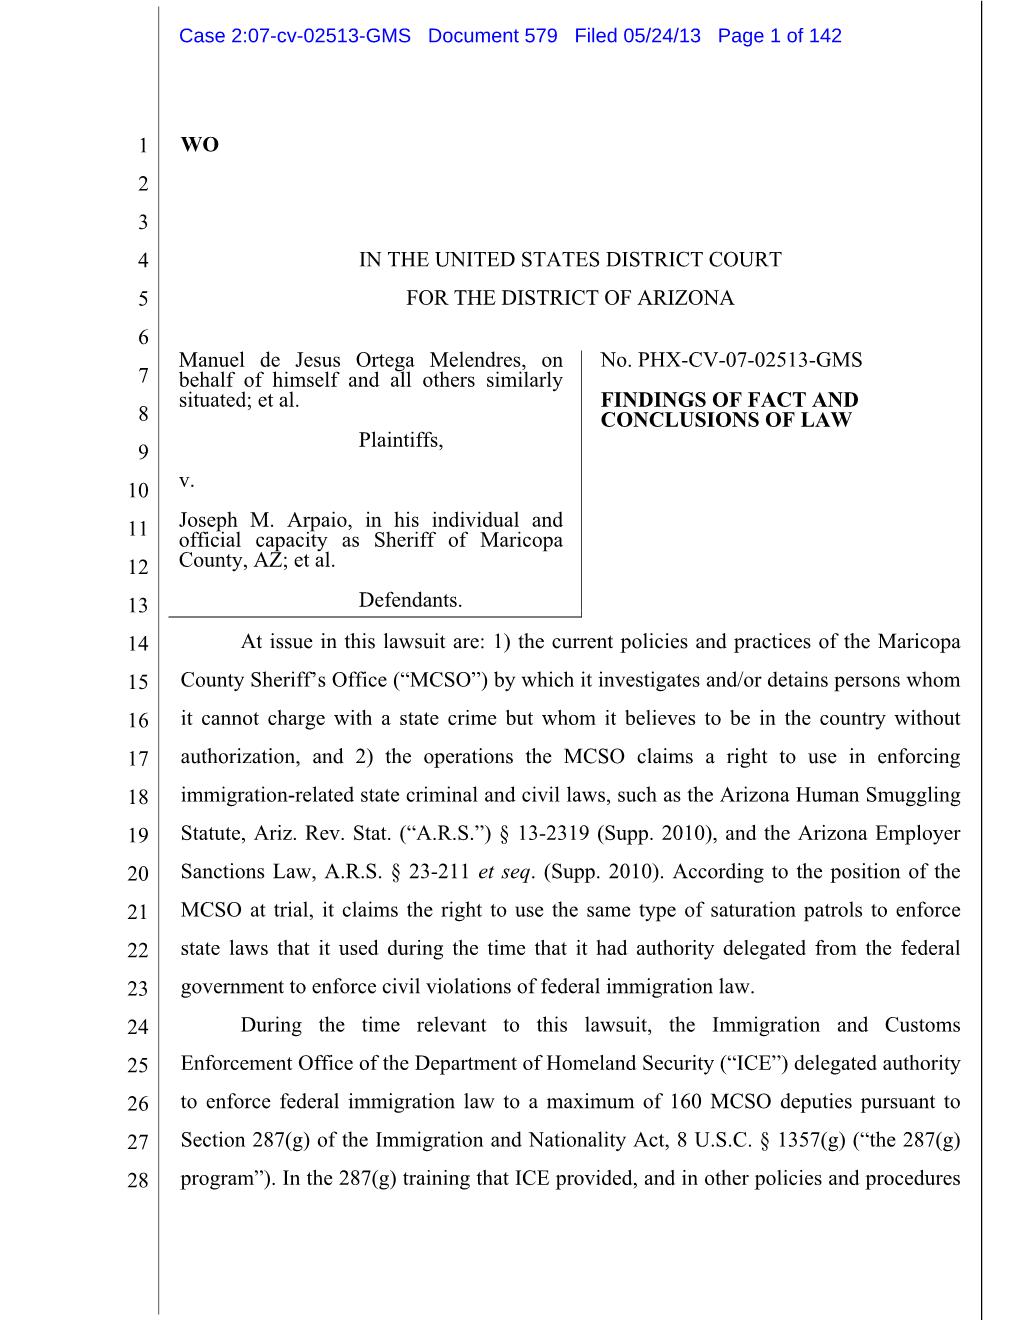 Case 2:07-Cv-02513-GMS Document 579 Filed 05/24/13 Page 1 of 142